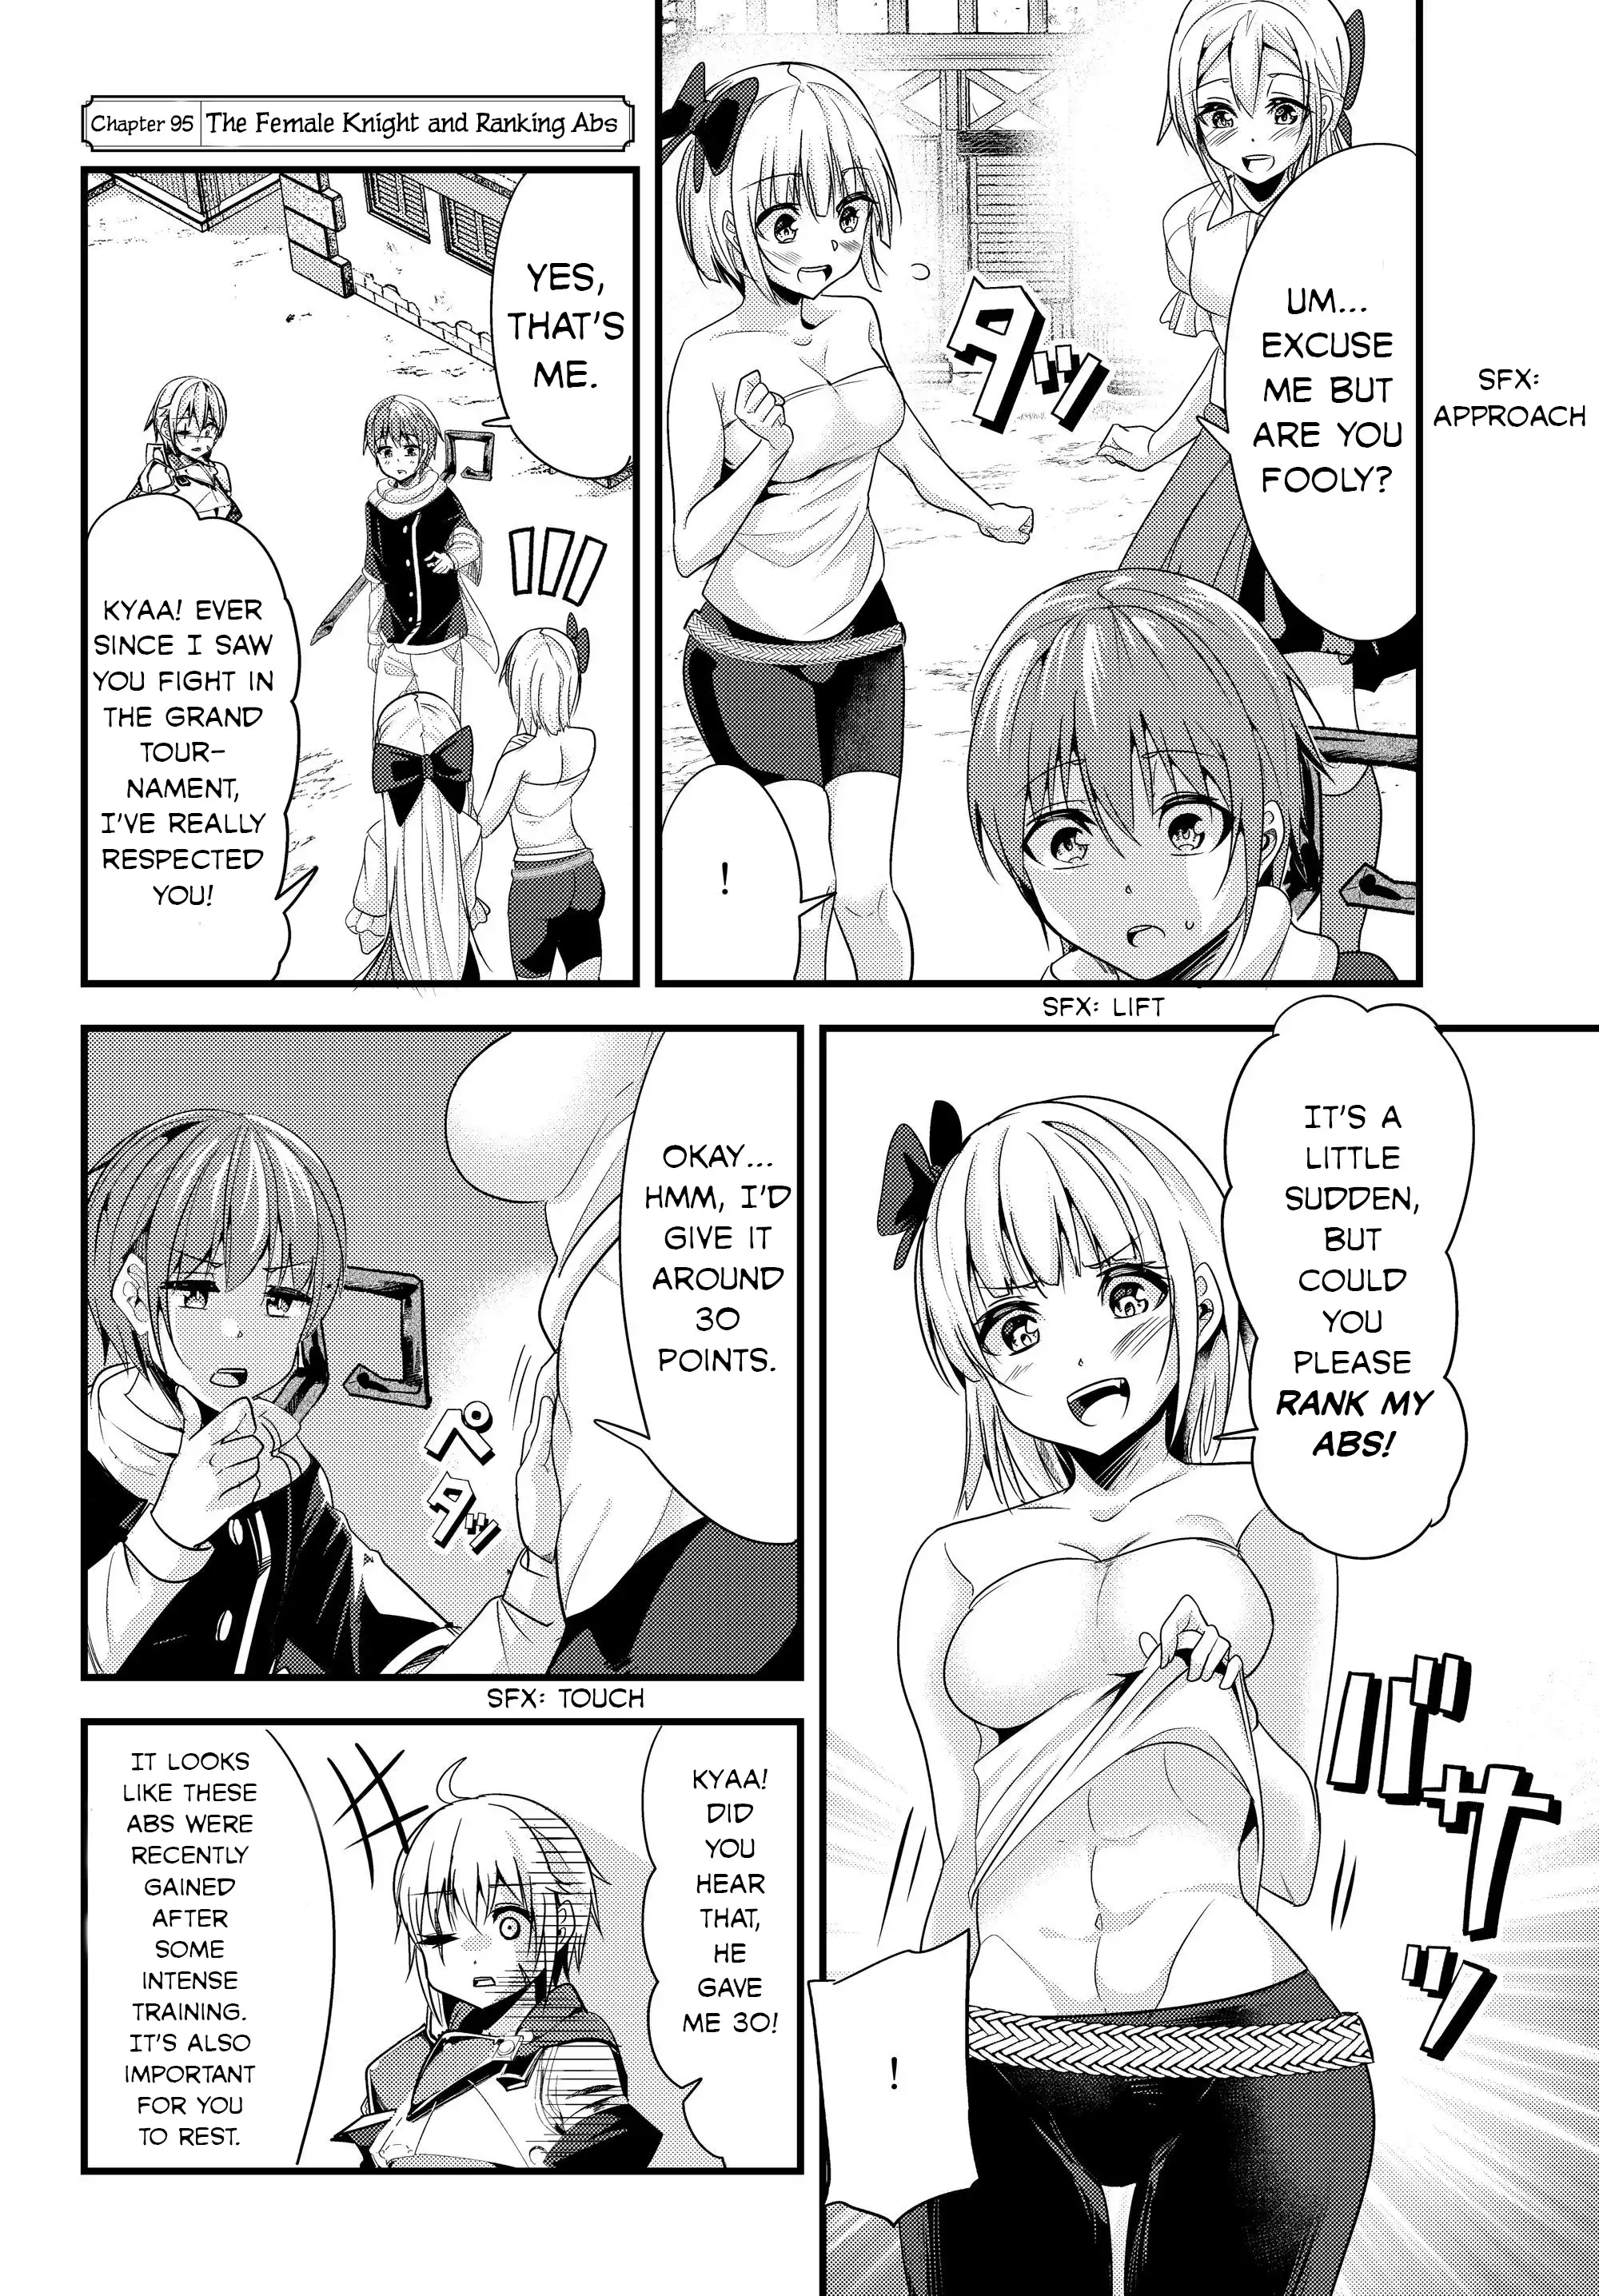 A Story About Treating a Female Knight, Who Has Never Been Treated as a Woman, as a Woman - Chapter 95 Page 2